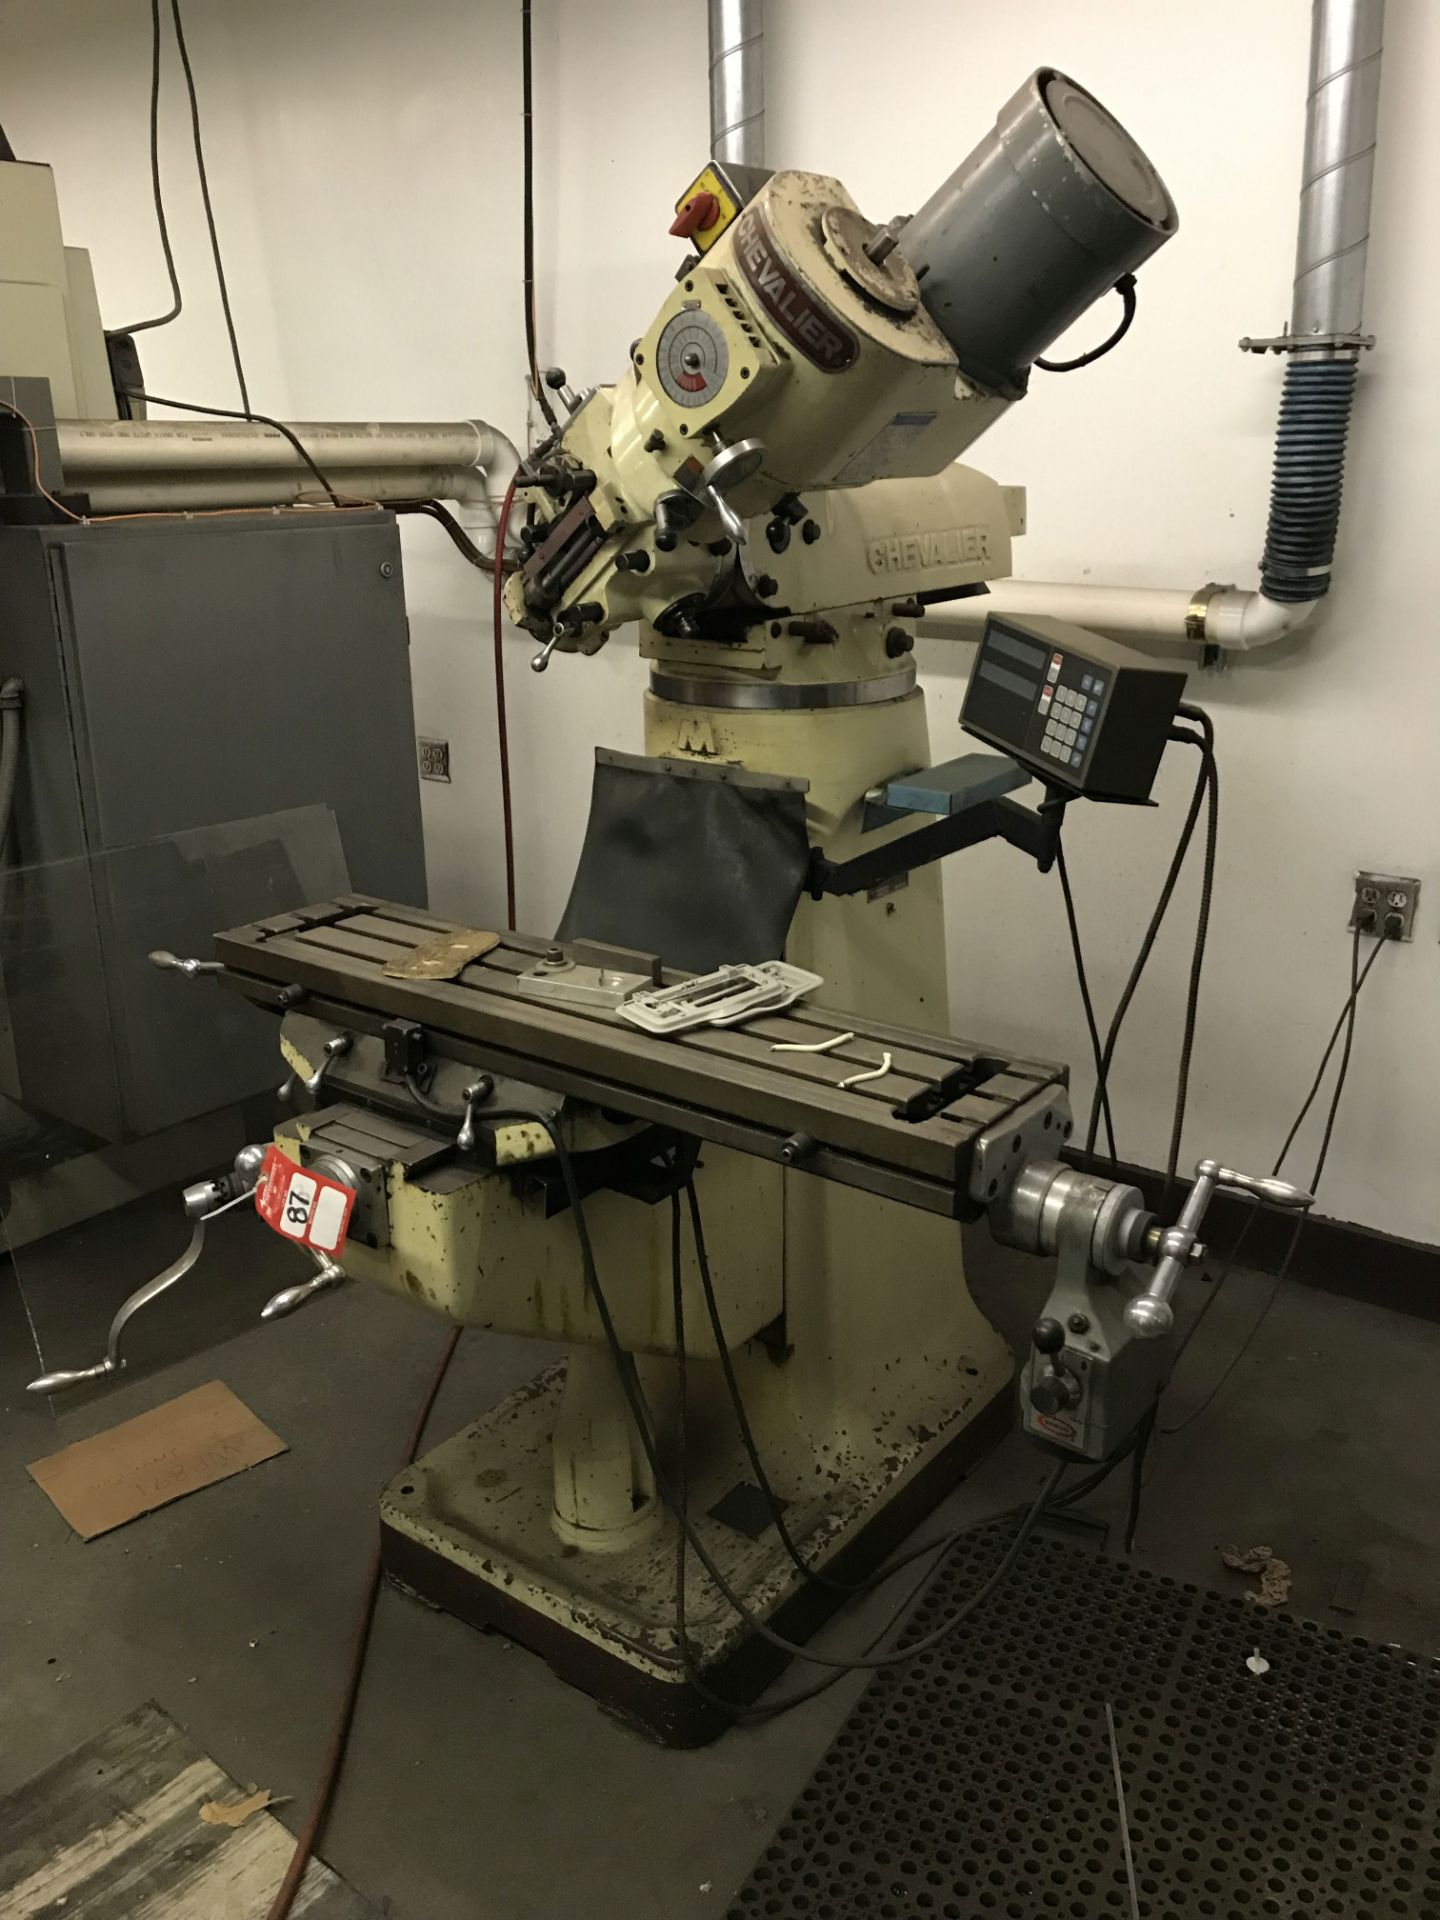 CHEVALIER VERTICAL MILLING MACHINE, 9'' x 42'' POWER FEED TABLE, 60-4500 SPINDLE SPEEDS, SONY - Image 2 of 5